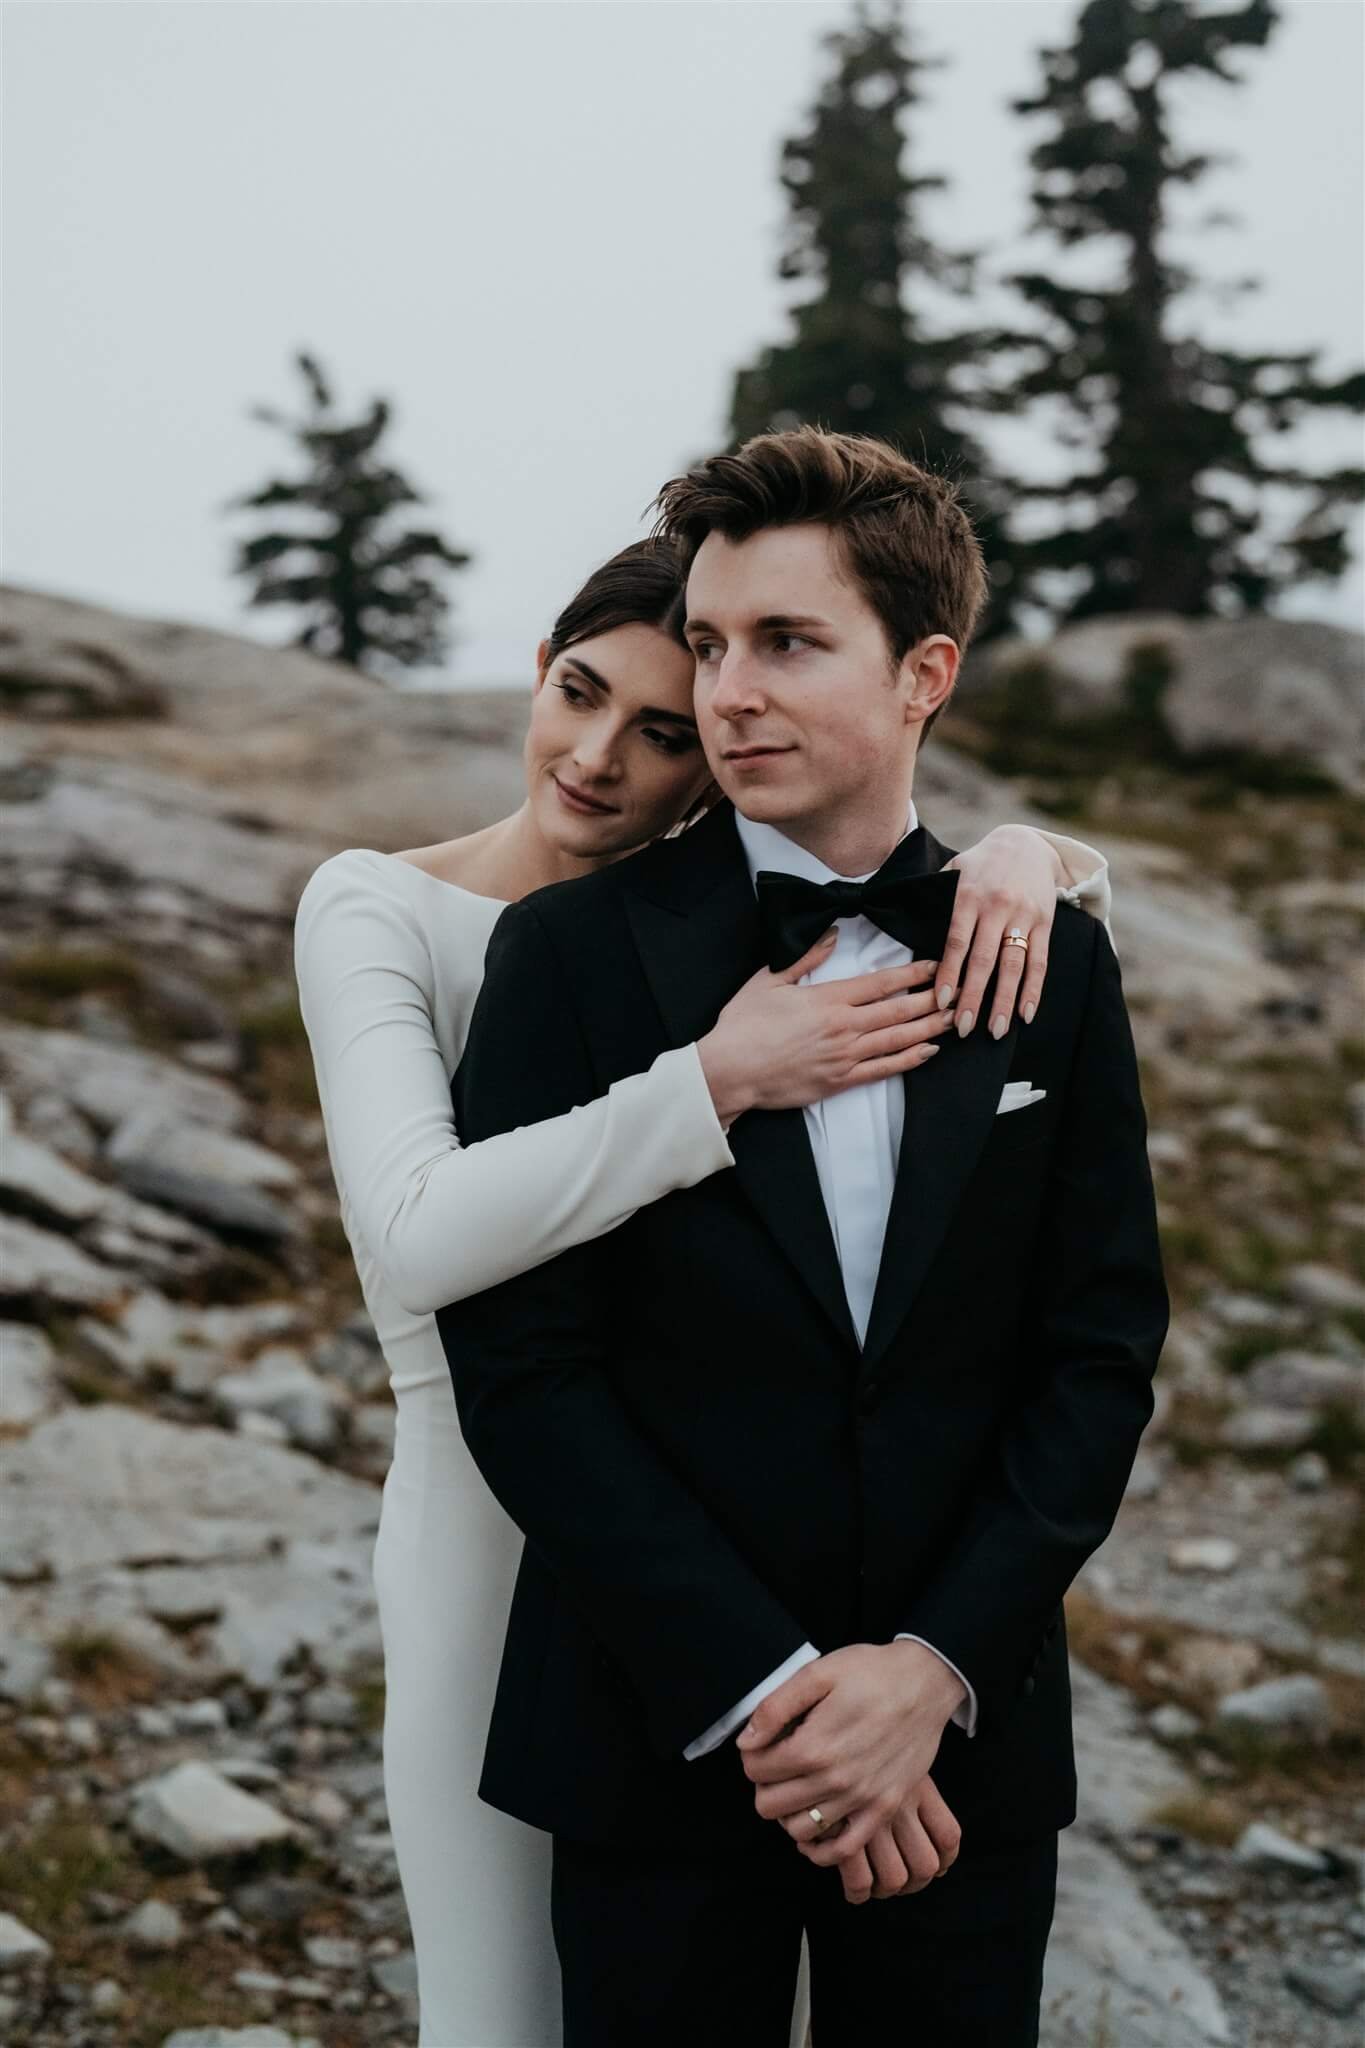 Bride wrapping arms around groom's neck during adventure portraits at Artist Point